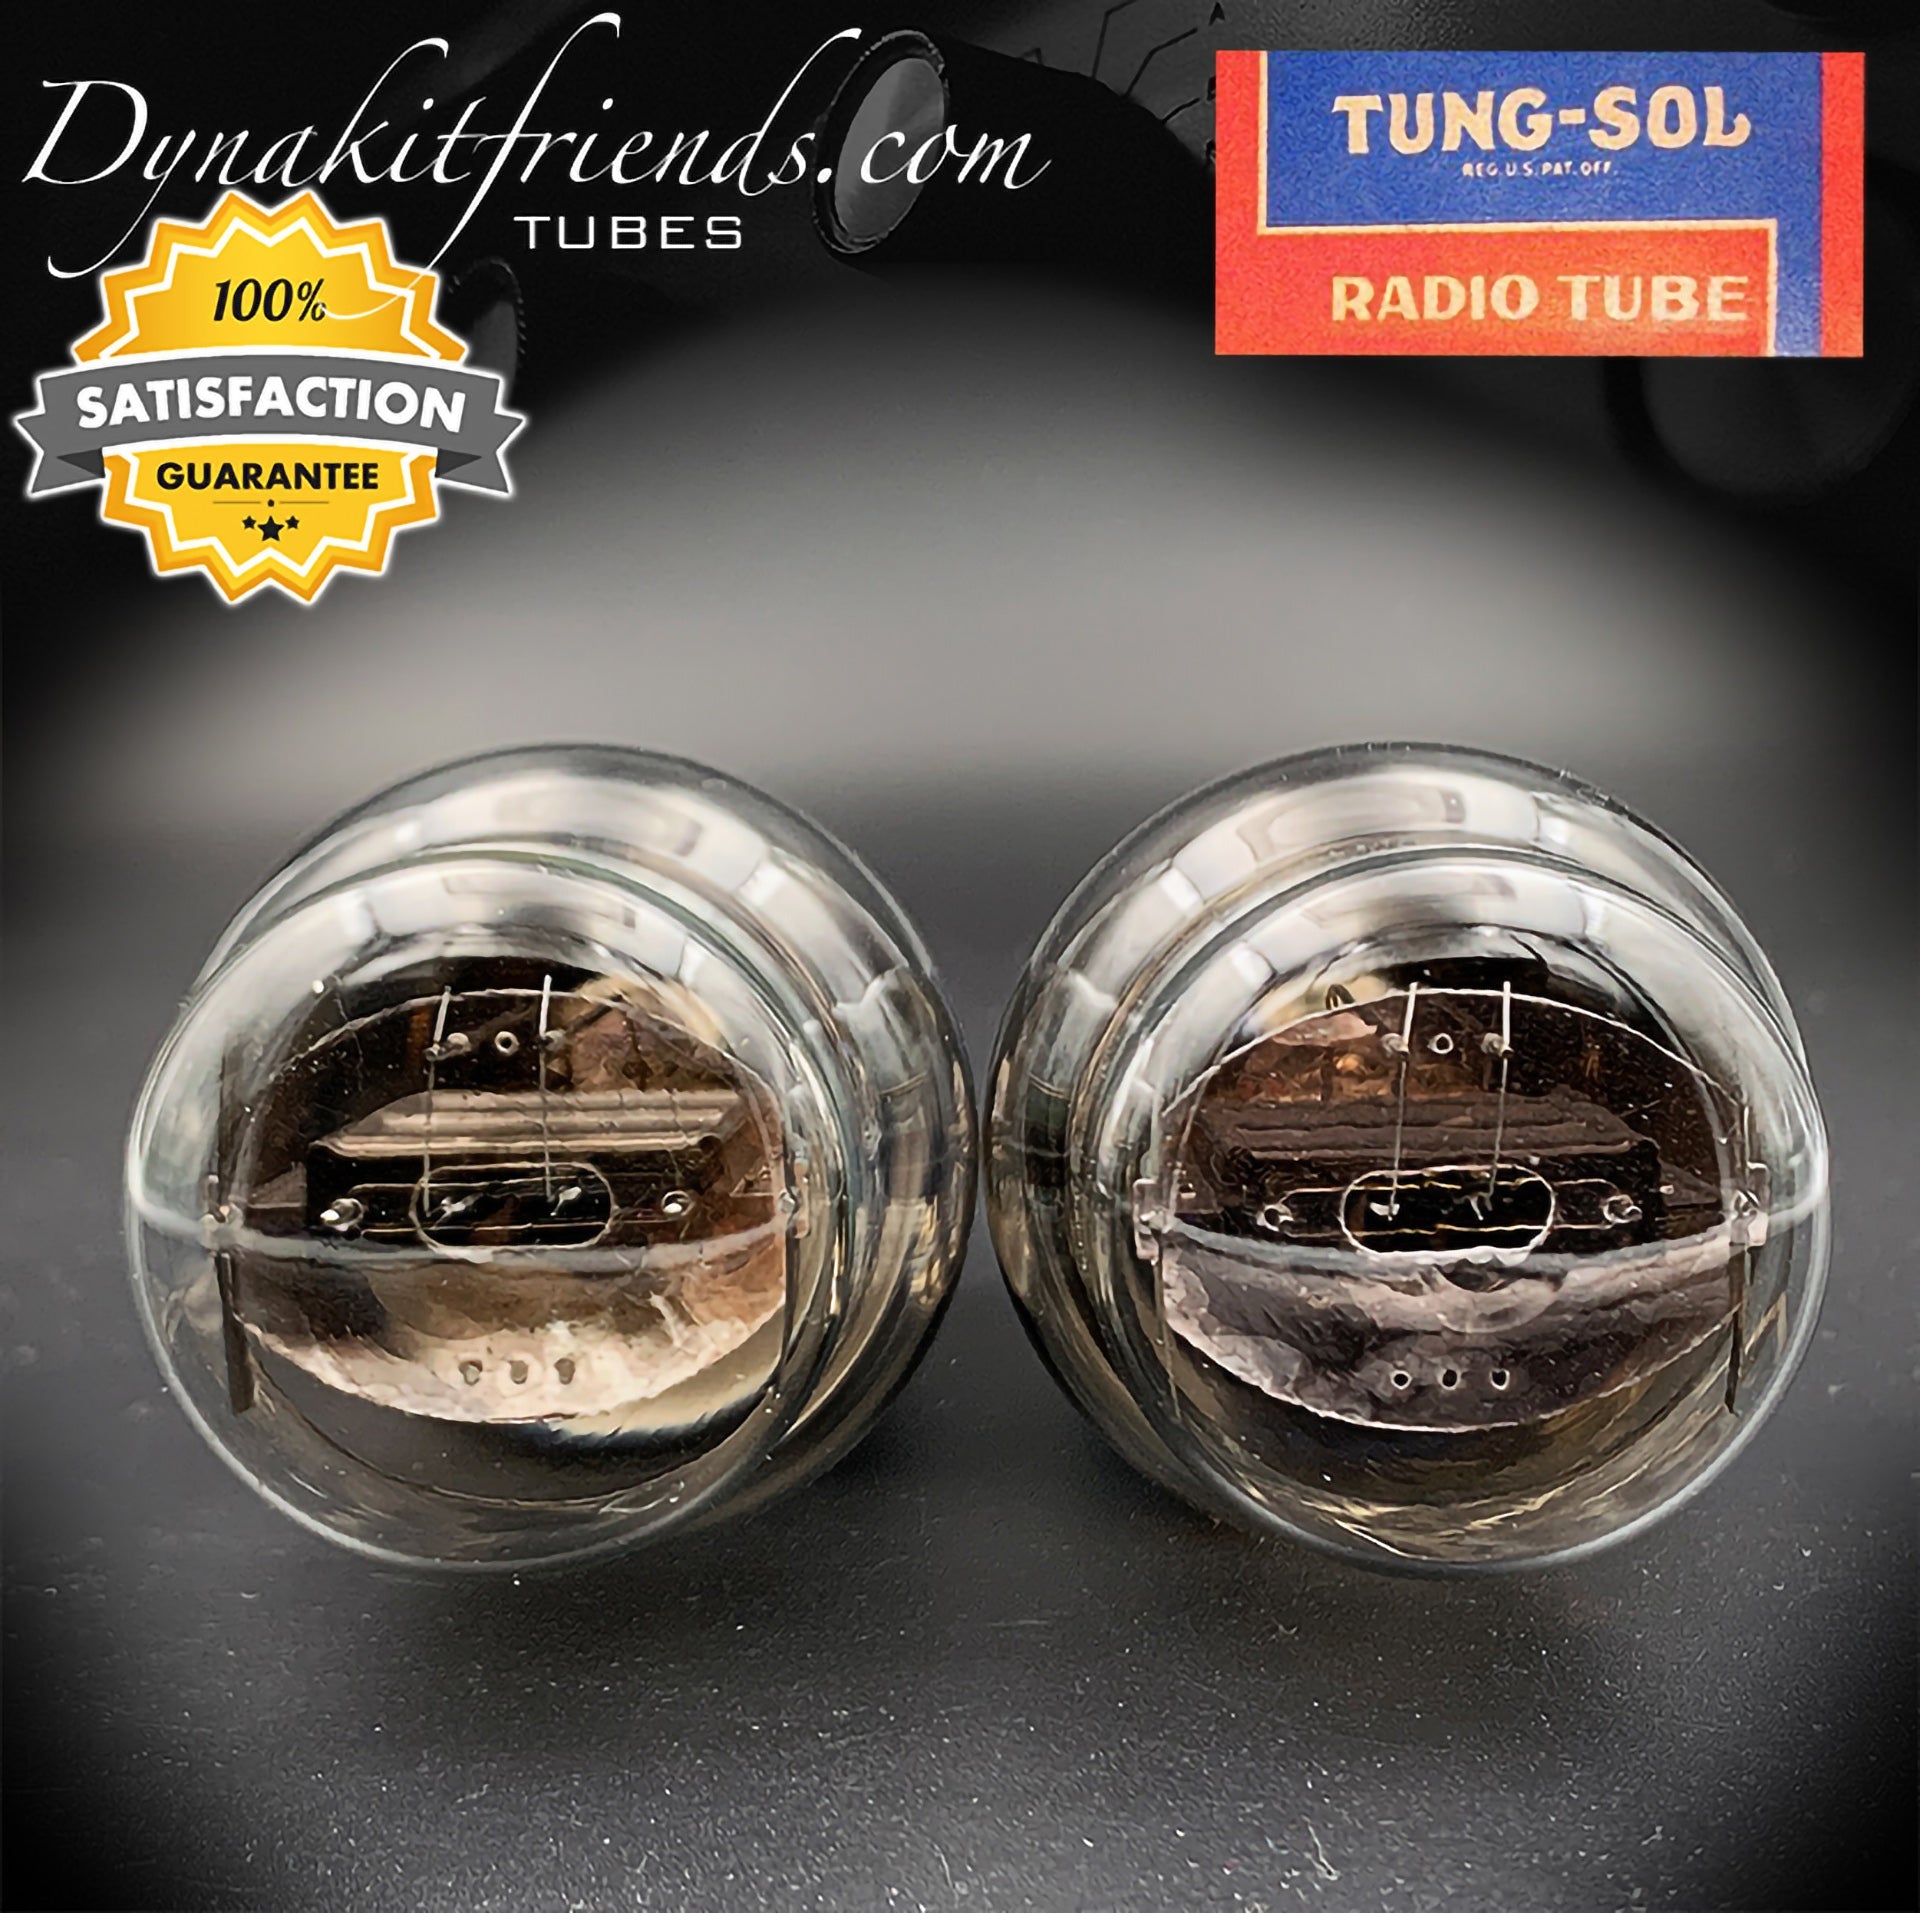 45 ST TUNG-SOL Black Plates Foil Dimpled Getter Matched Pair Tubes Made in USA 1940's - Vacuum Tubes Treasures